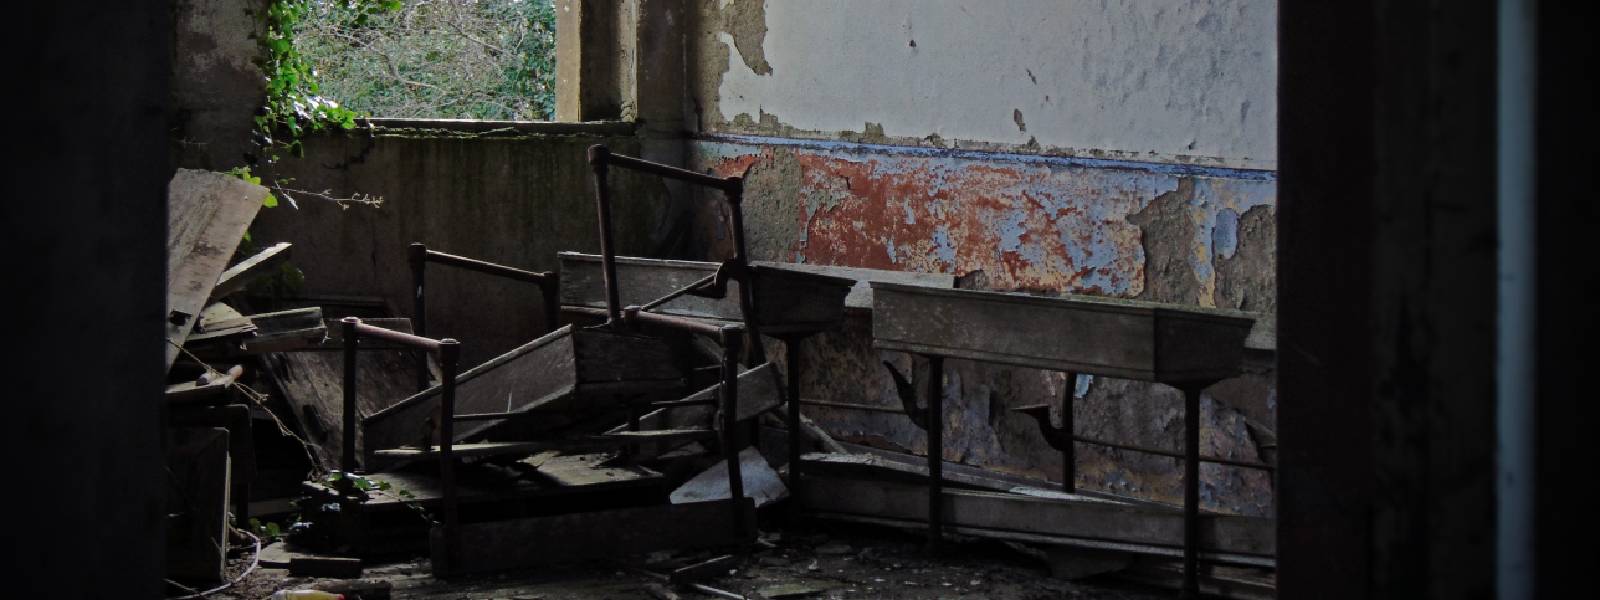 Inquiry into dilapidated buildings at schools